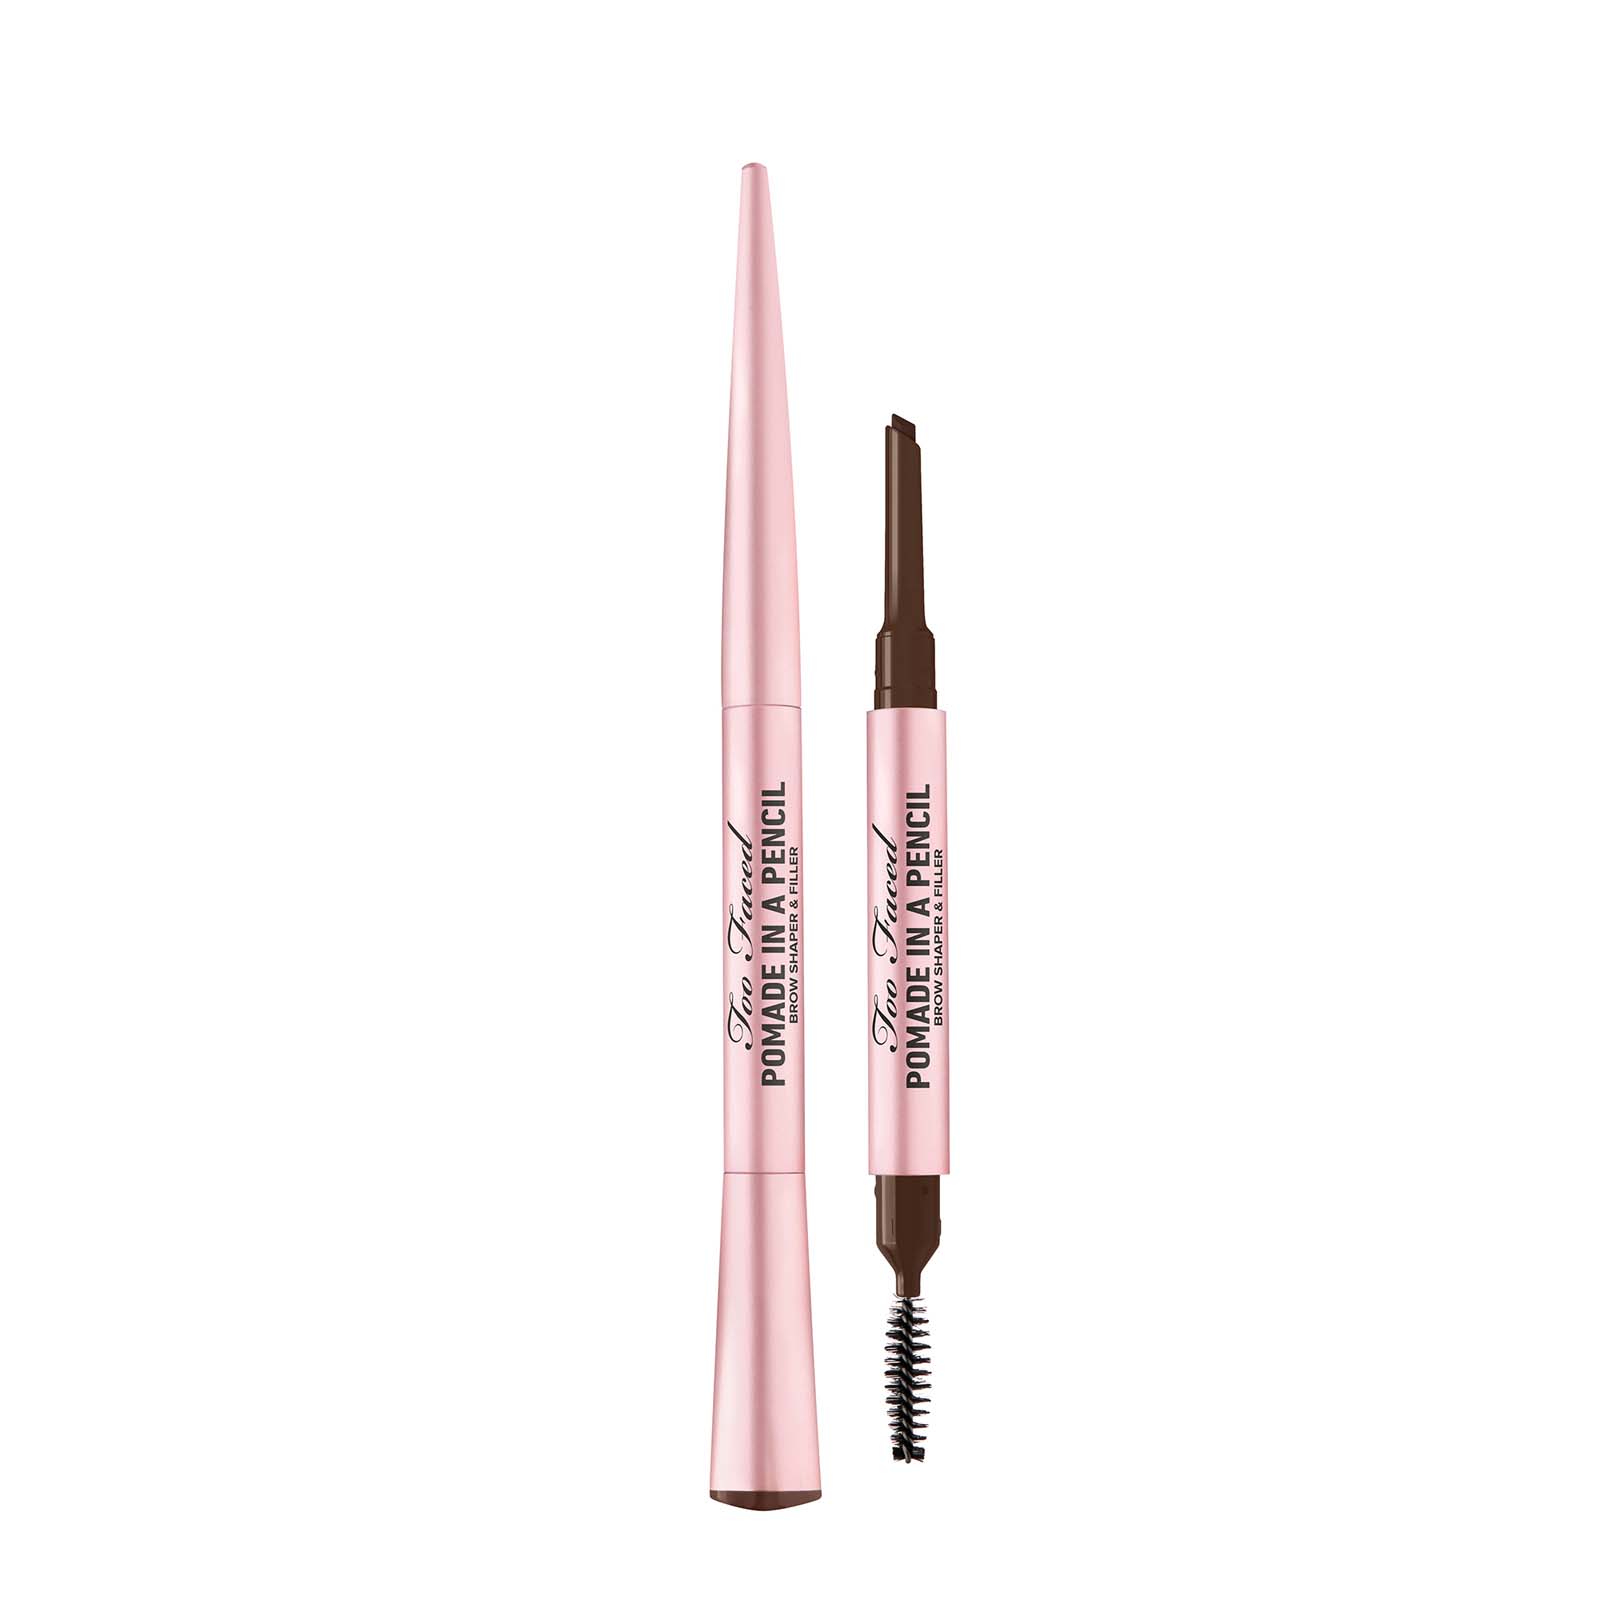 too faced brow pomade in a pencil 0.19g natural blonde